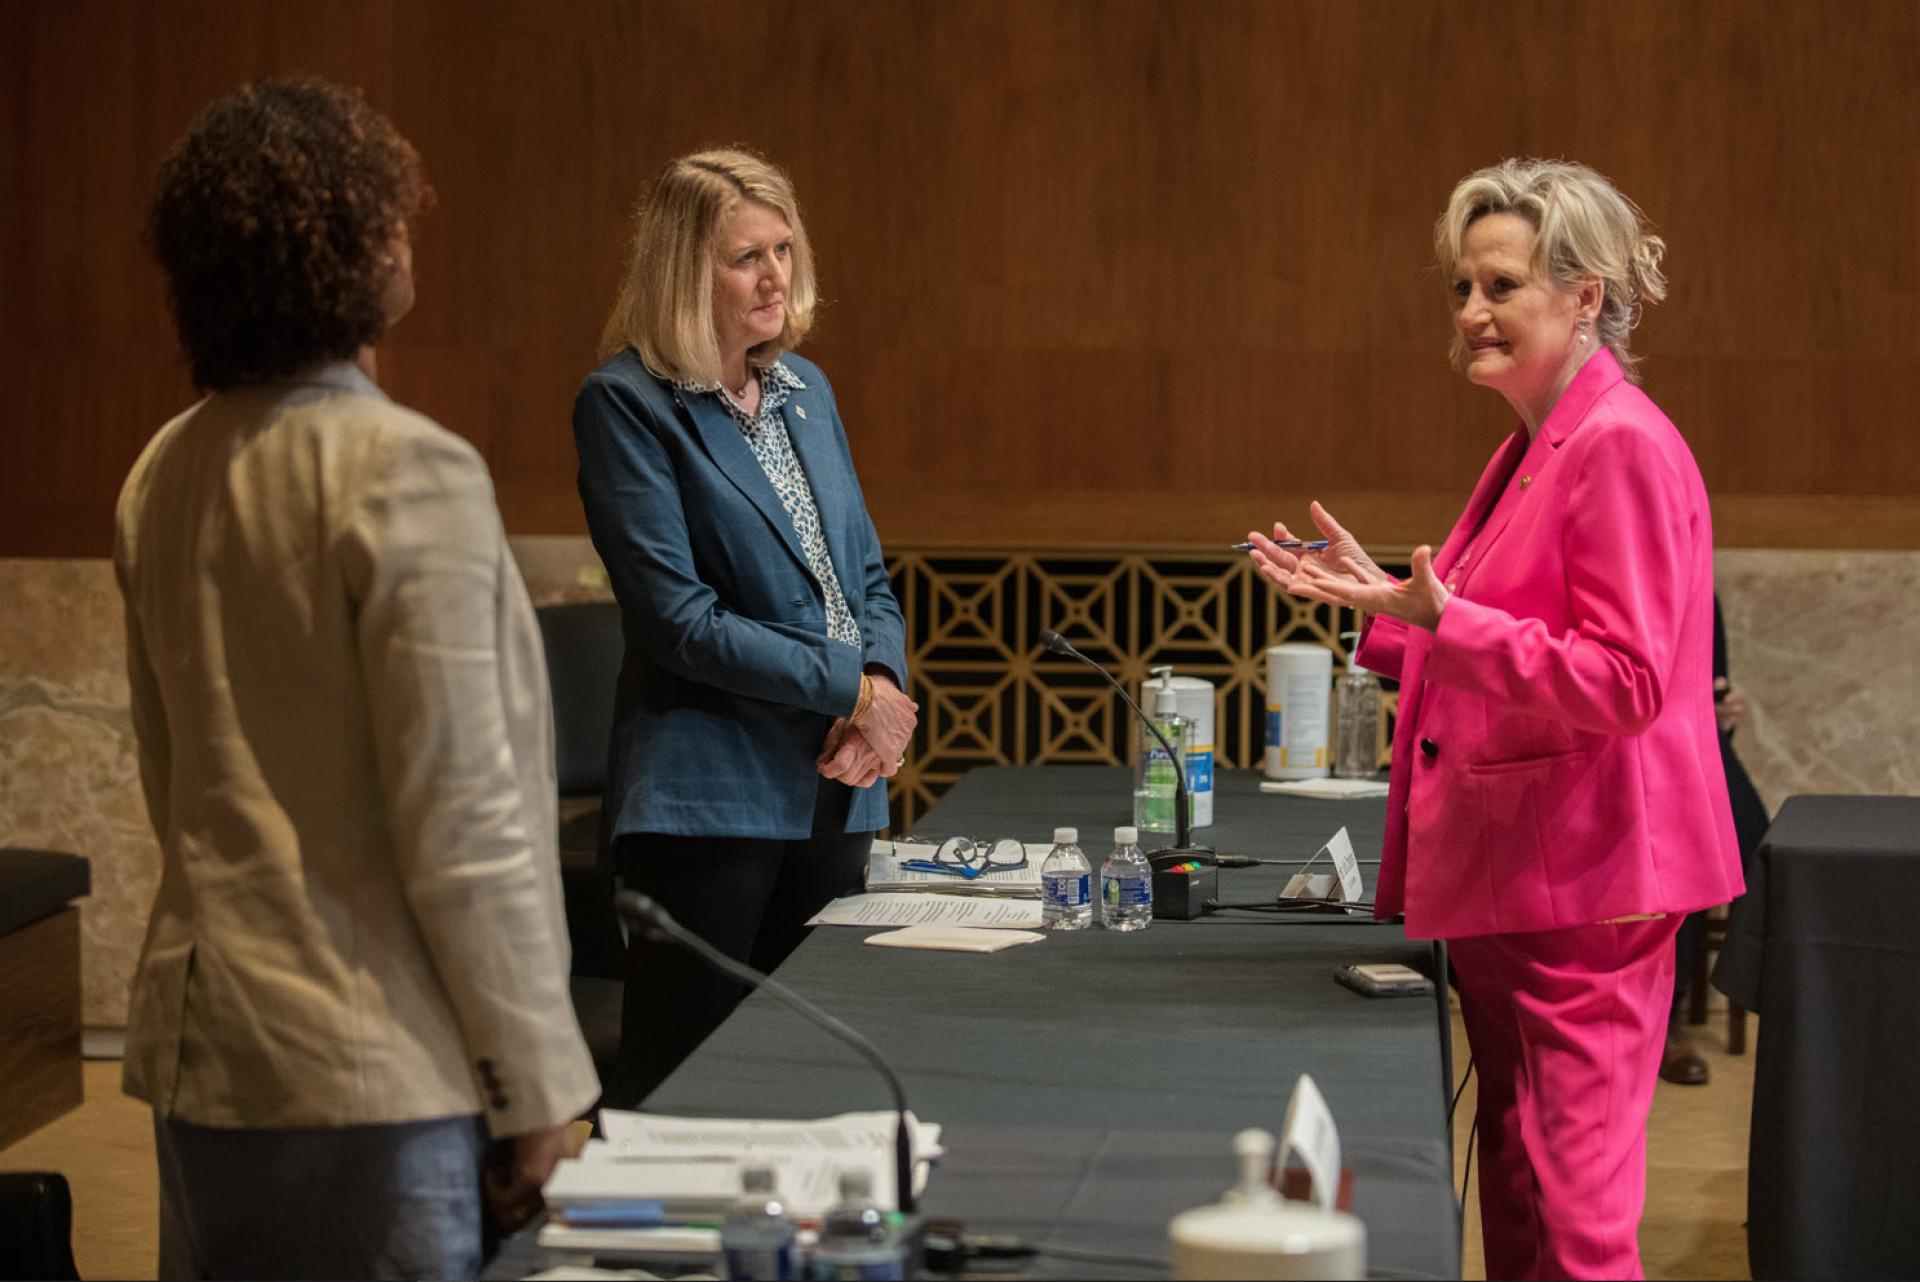 Senator Hyde-Smith greets U.S. Forest Service Chief Vicki Christiansen prior to an Interior Appropriations Subcommittee hearing on the agency’s FY2022 budget. (May 26, 2021)